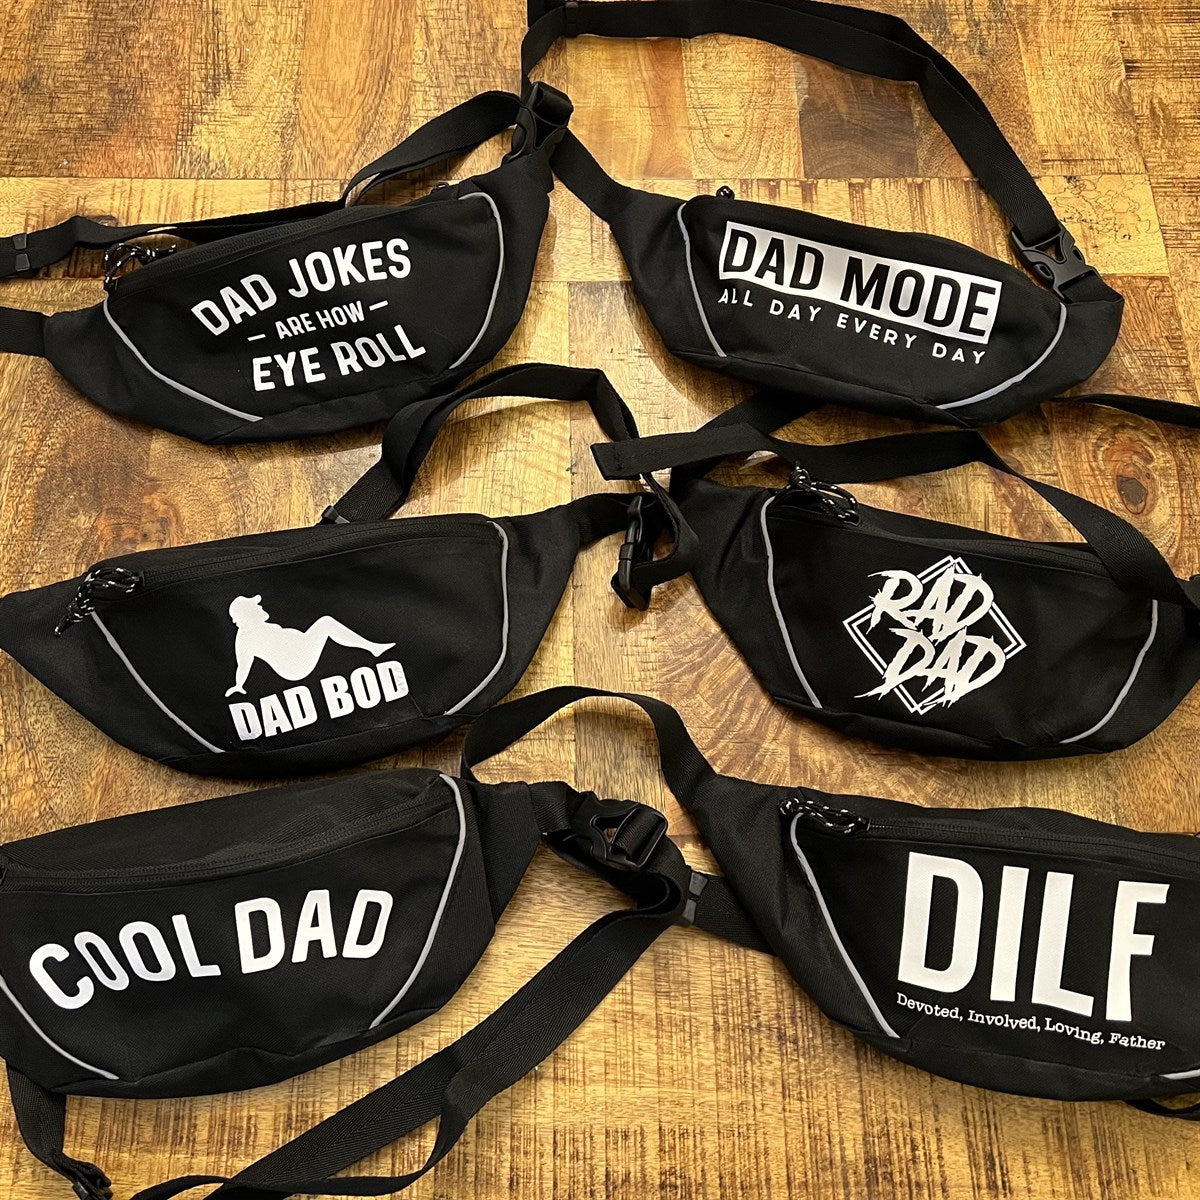 Dad Jokes Are How Eye Roll Fanny Pack